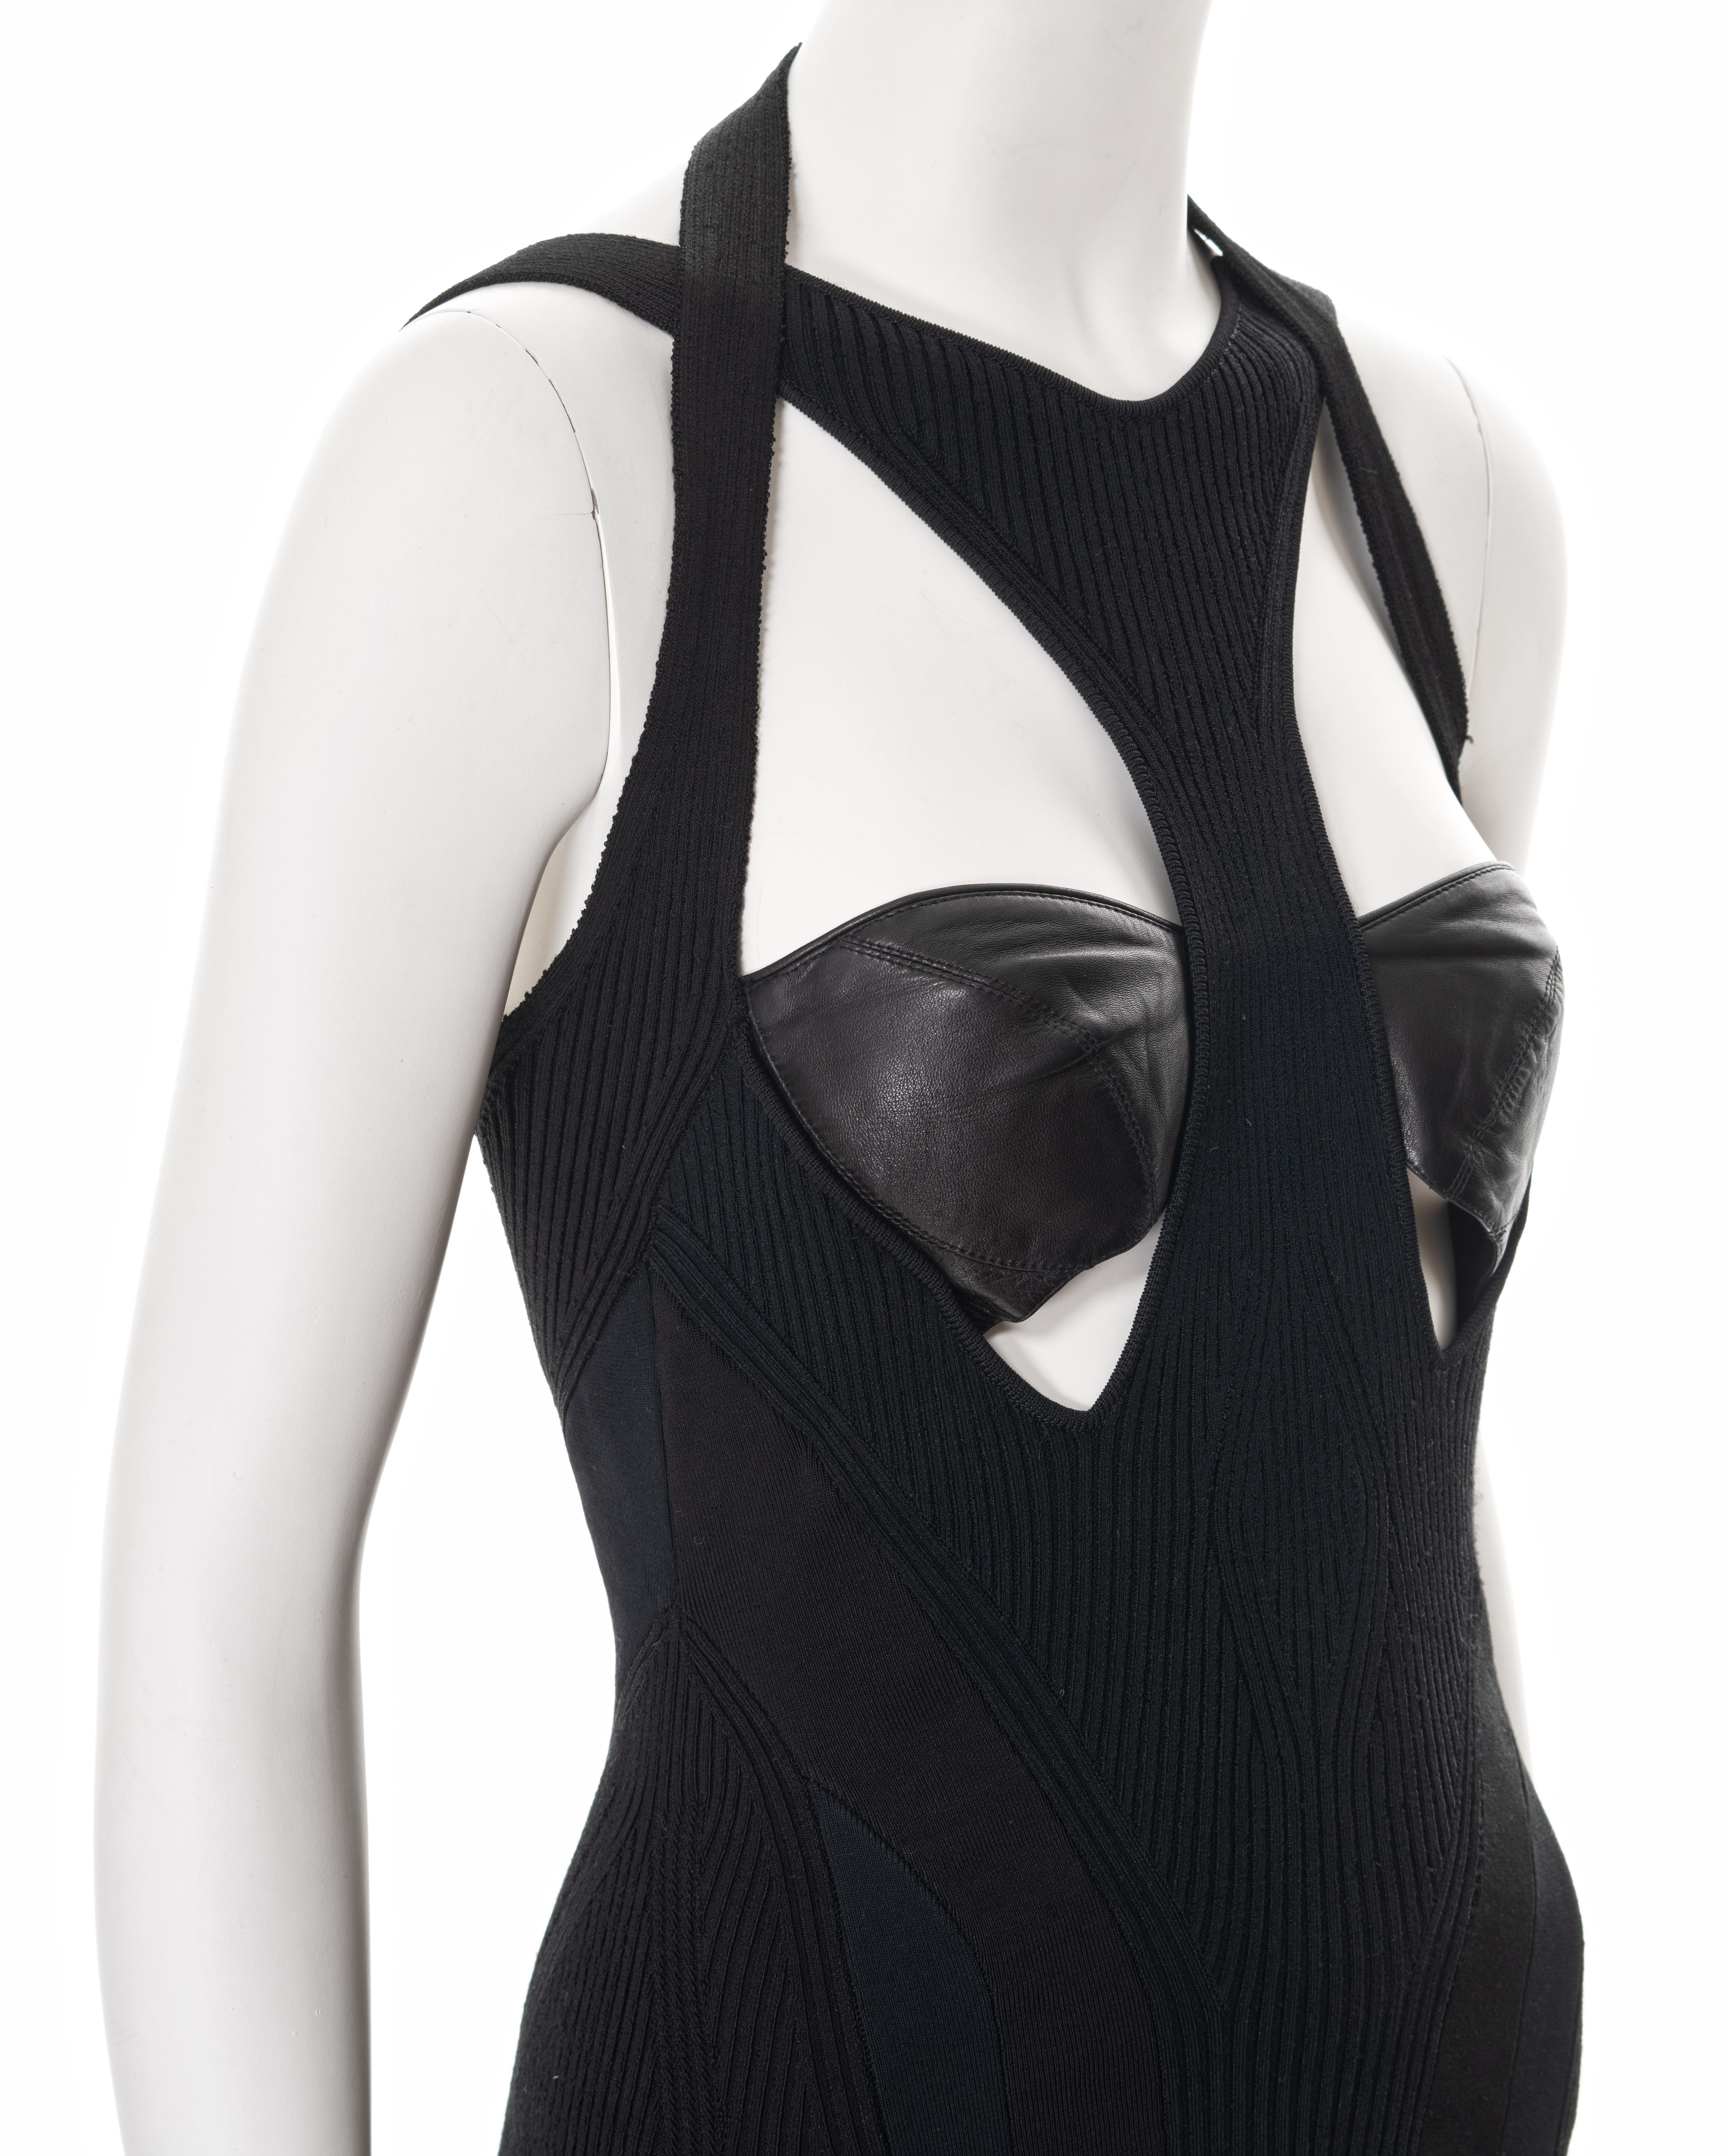 Alexander McQueen black rib knit mini dress with leather bustier, ss 2004 For Sale 1